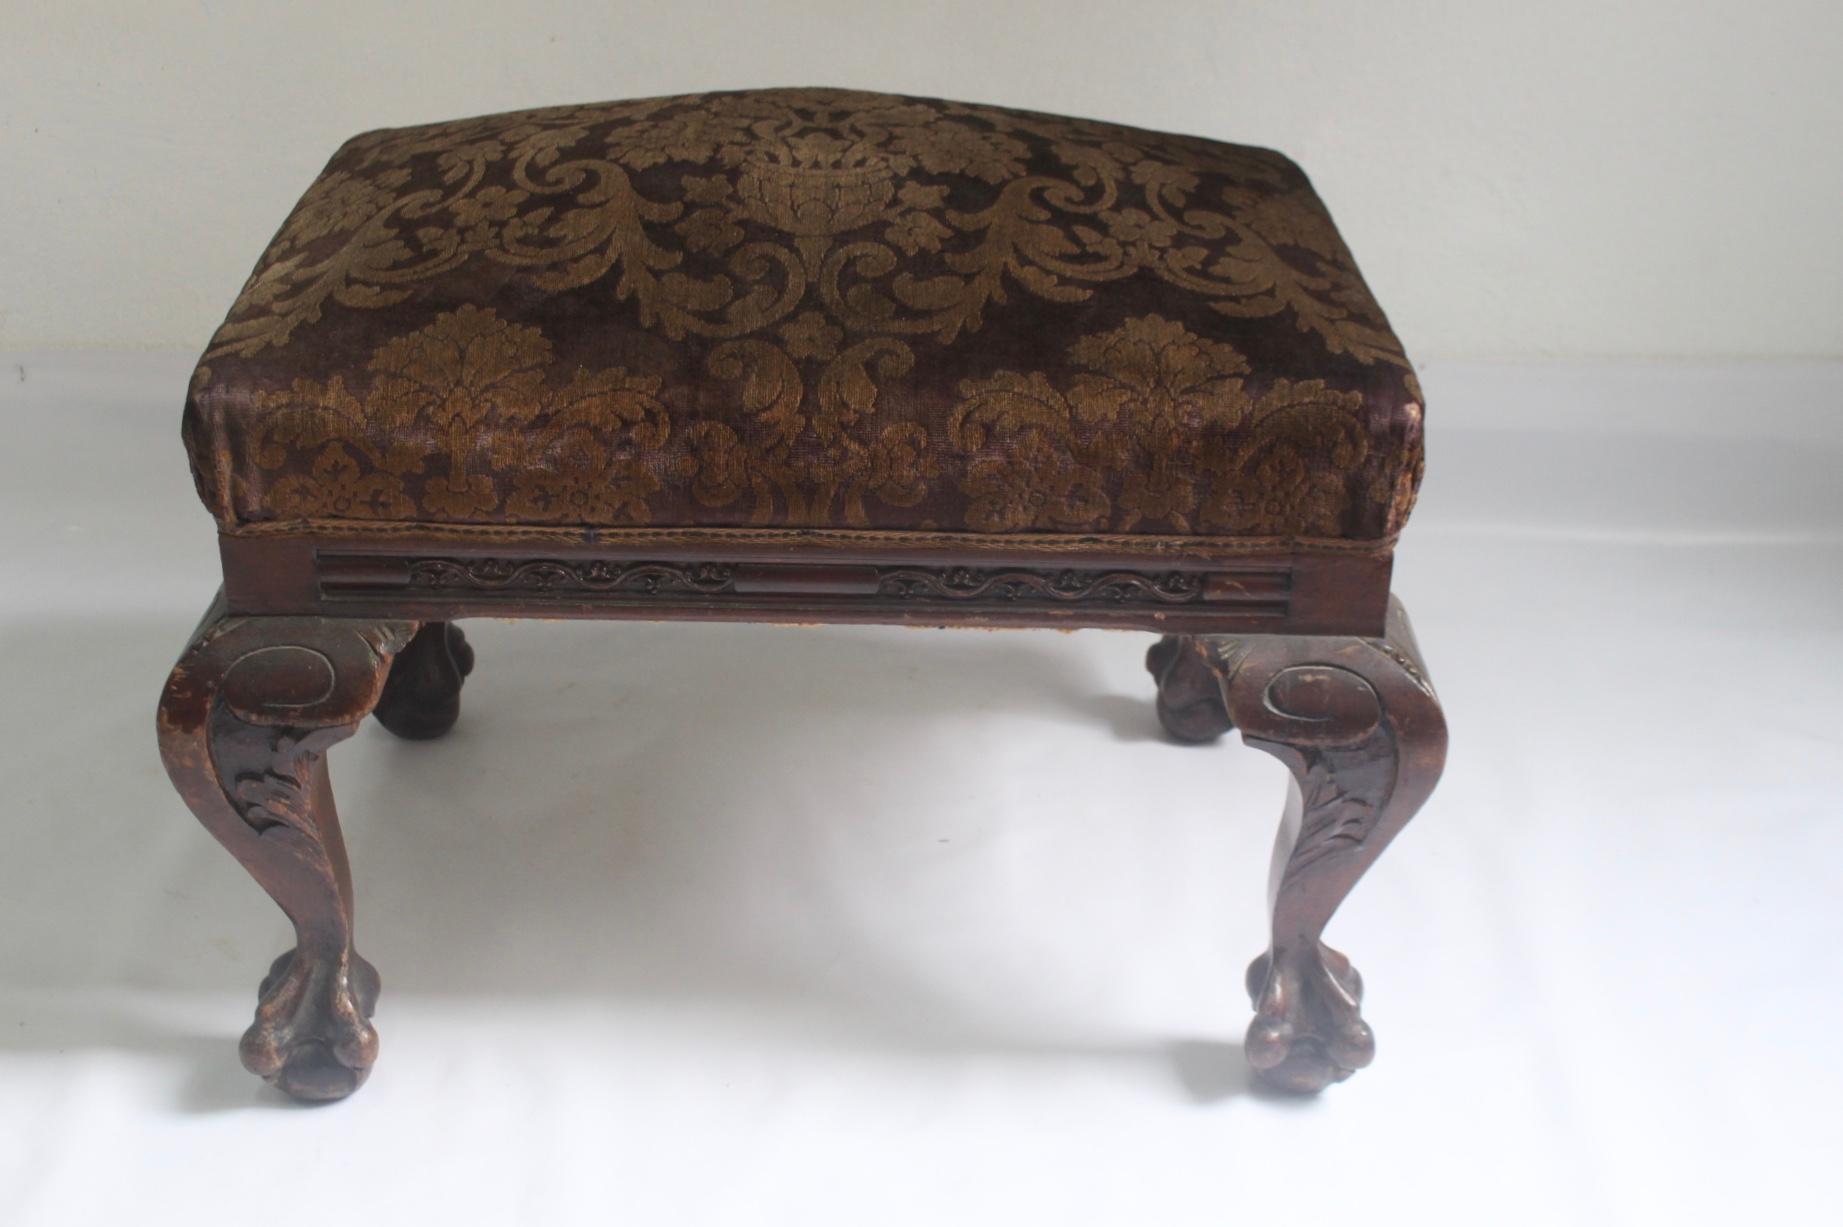 1910s Chippendale Mahogany Ottoman or Stool with Original Velvet Upholstery For Sale 1